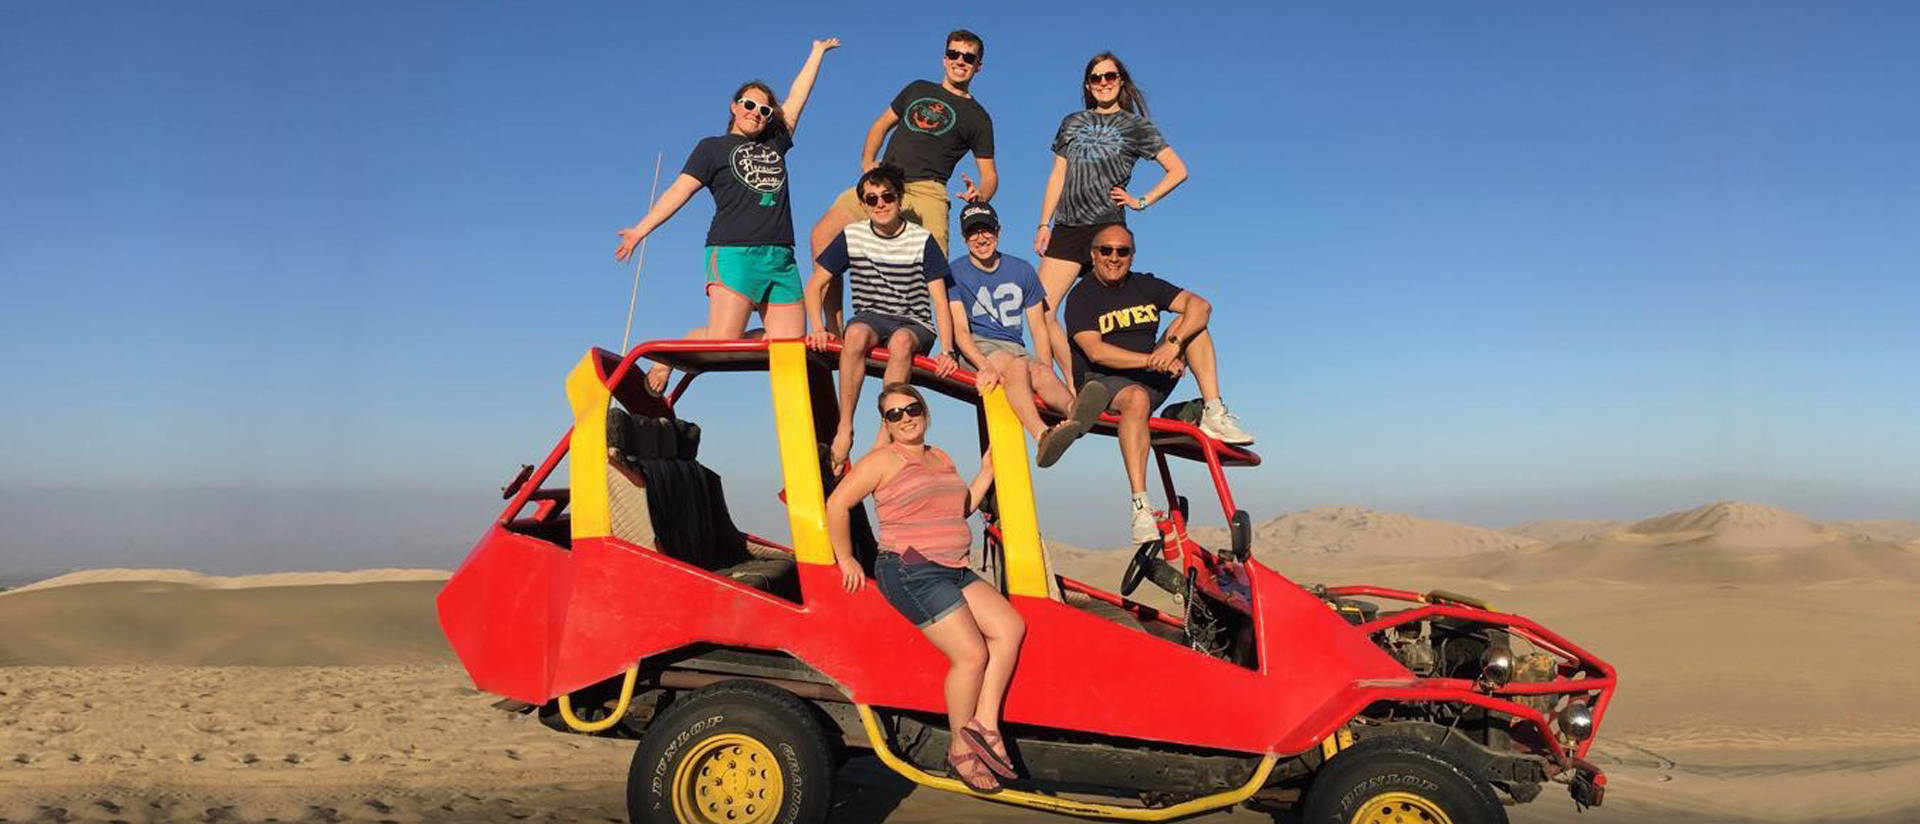 Educaiton students atop a dune buggy in Peru